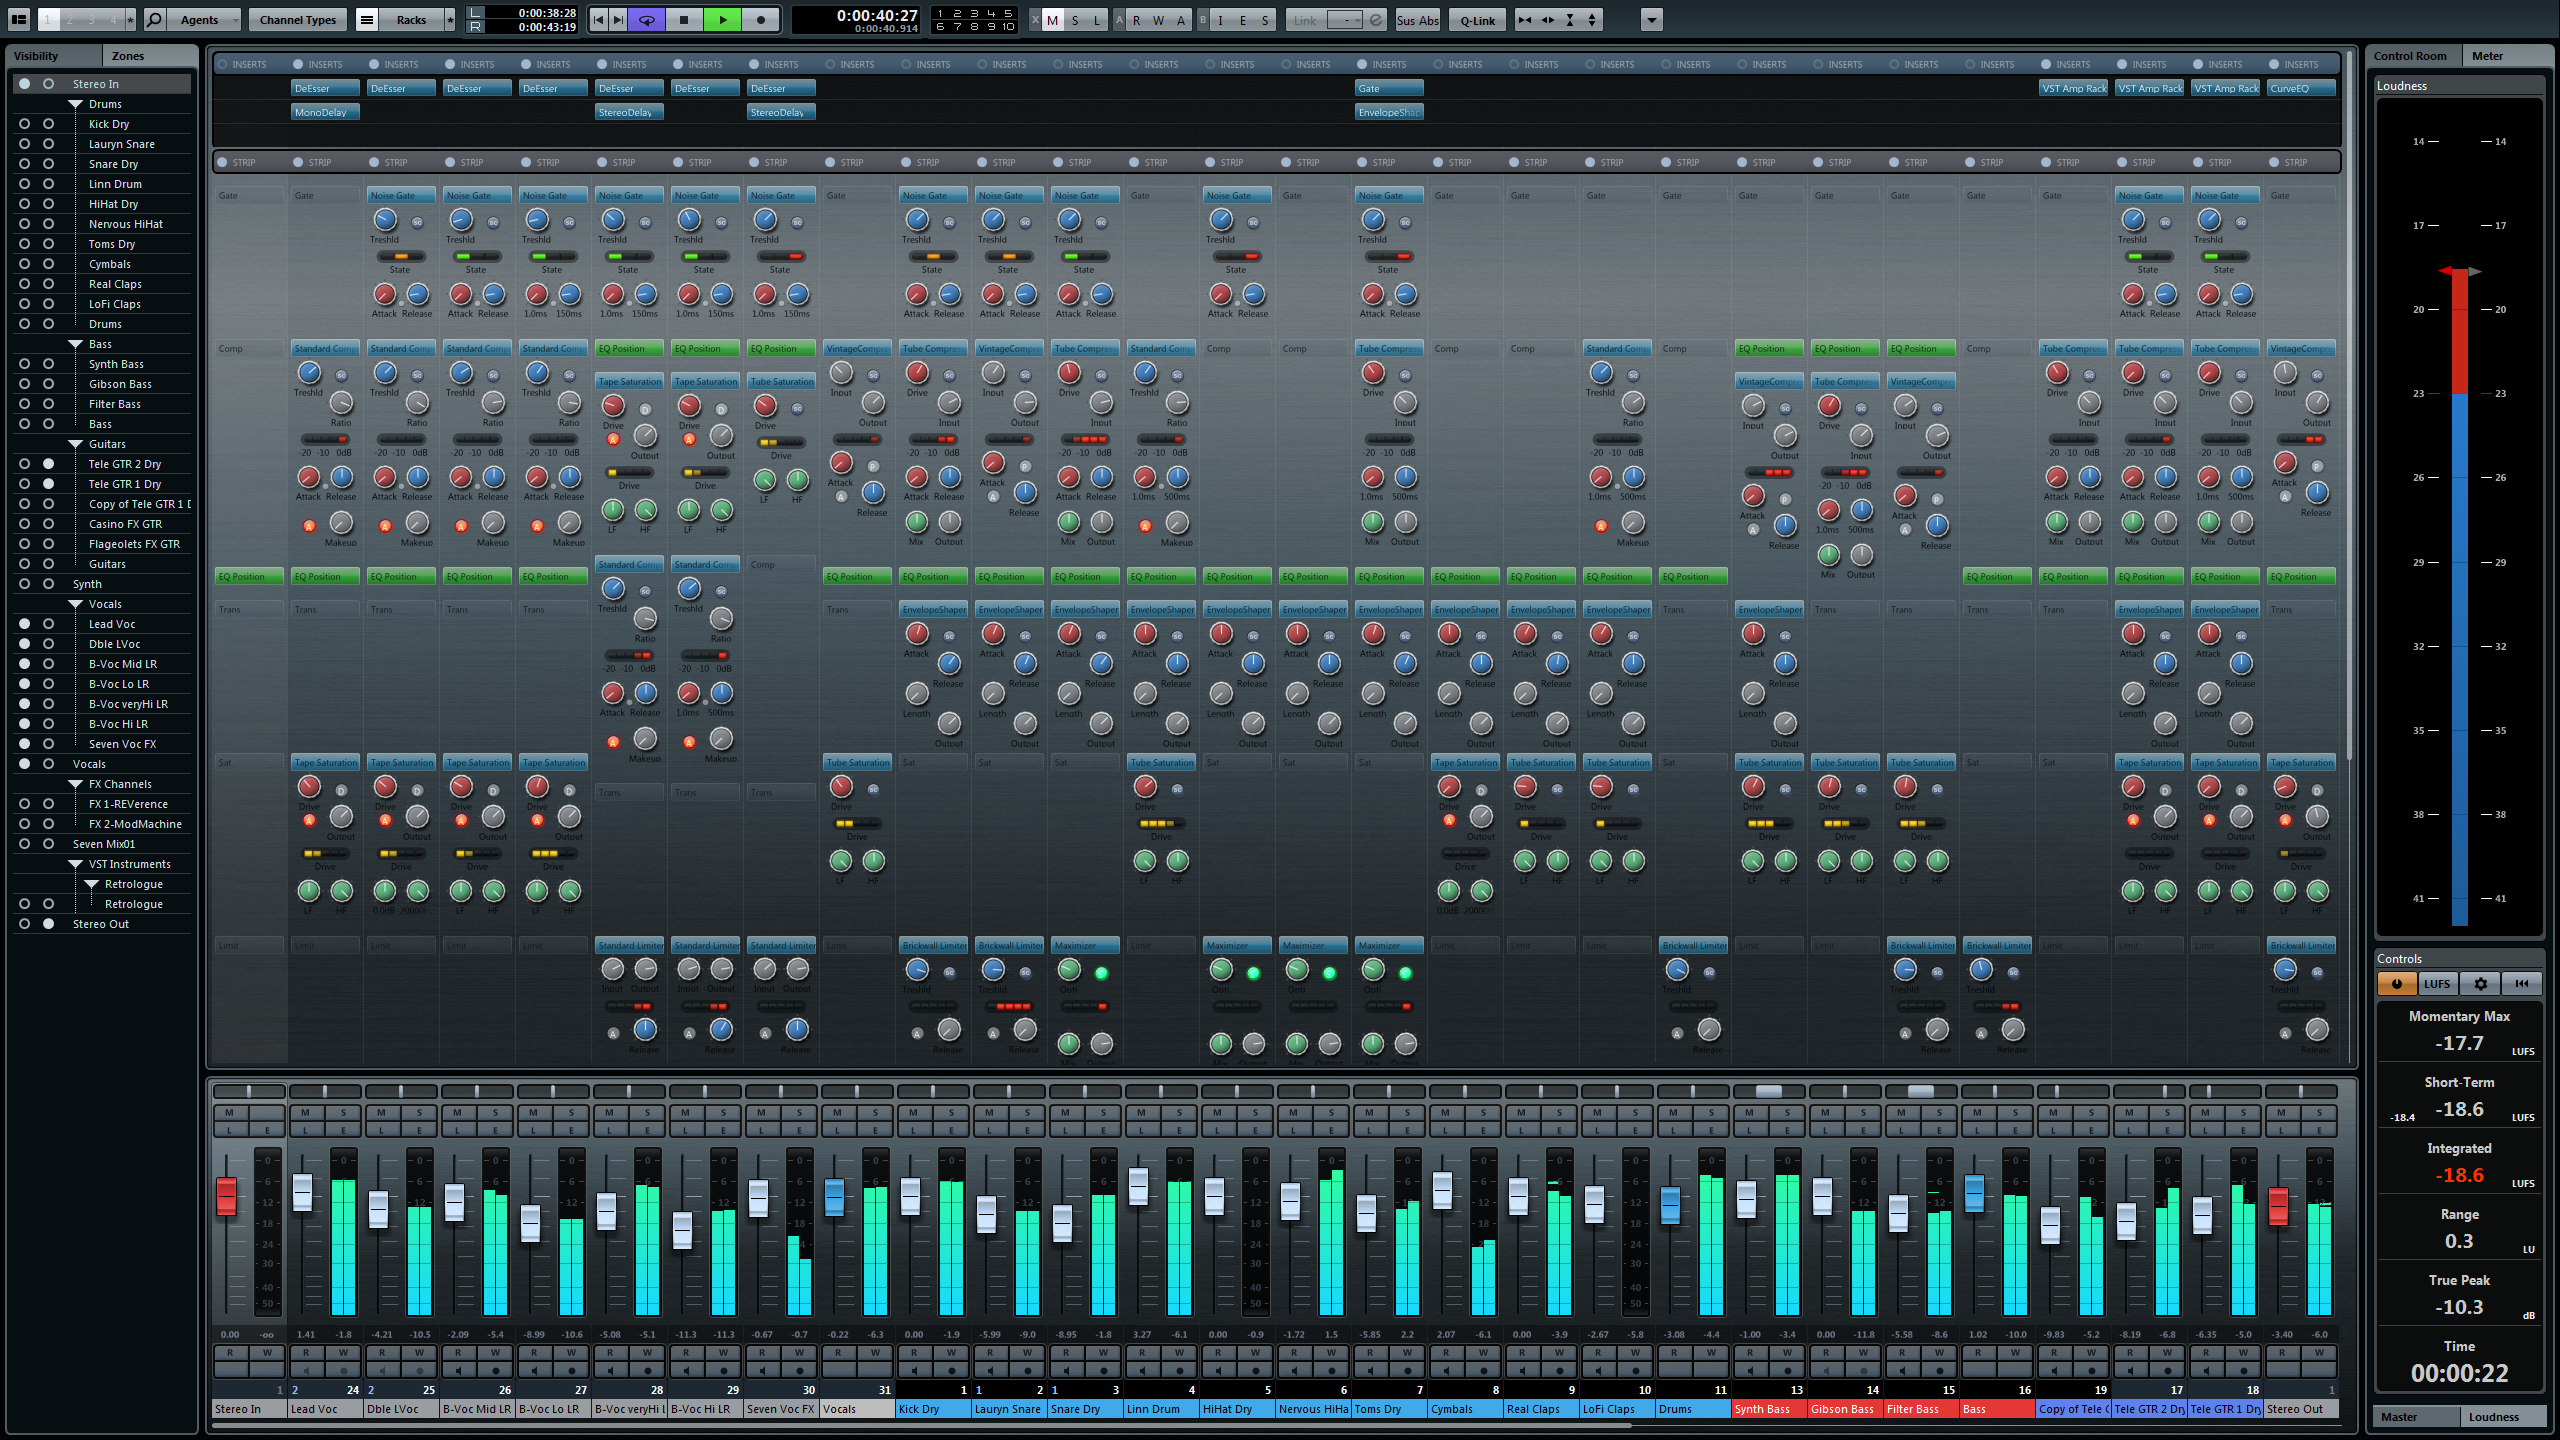 01_Stellar_mixing_01a_Mix_Console_Meter_zones.png